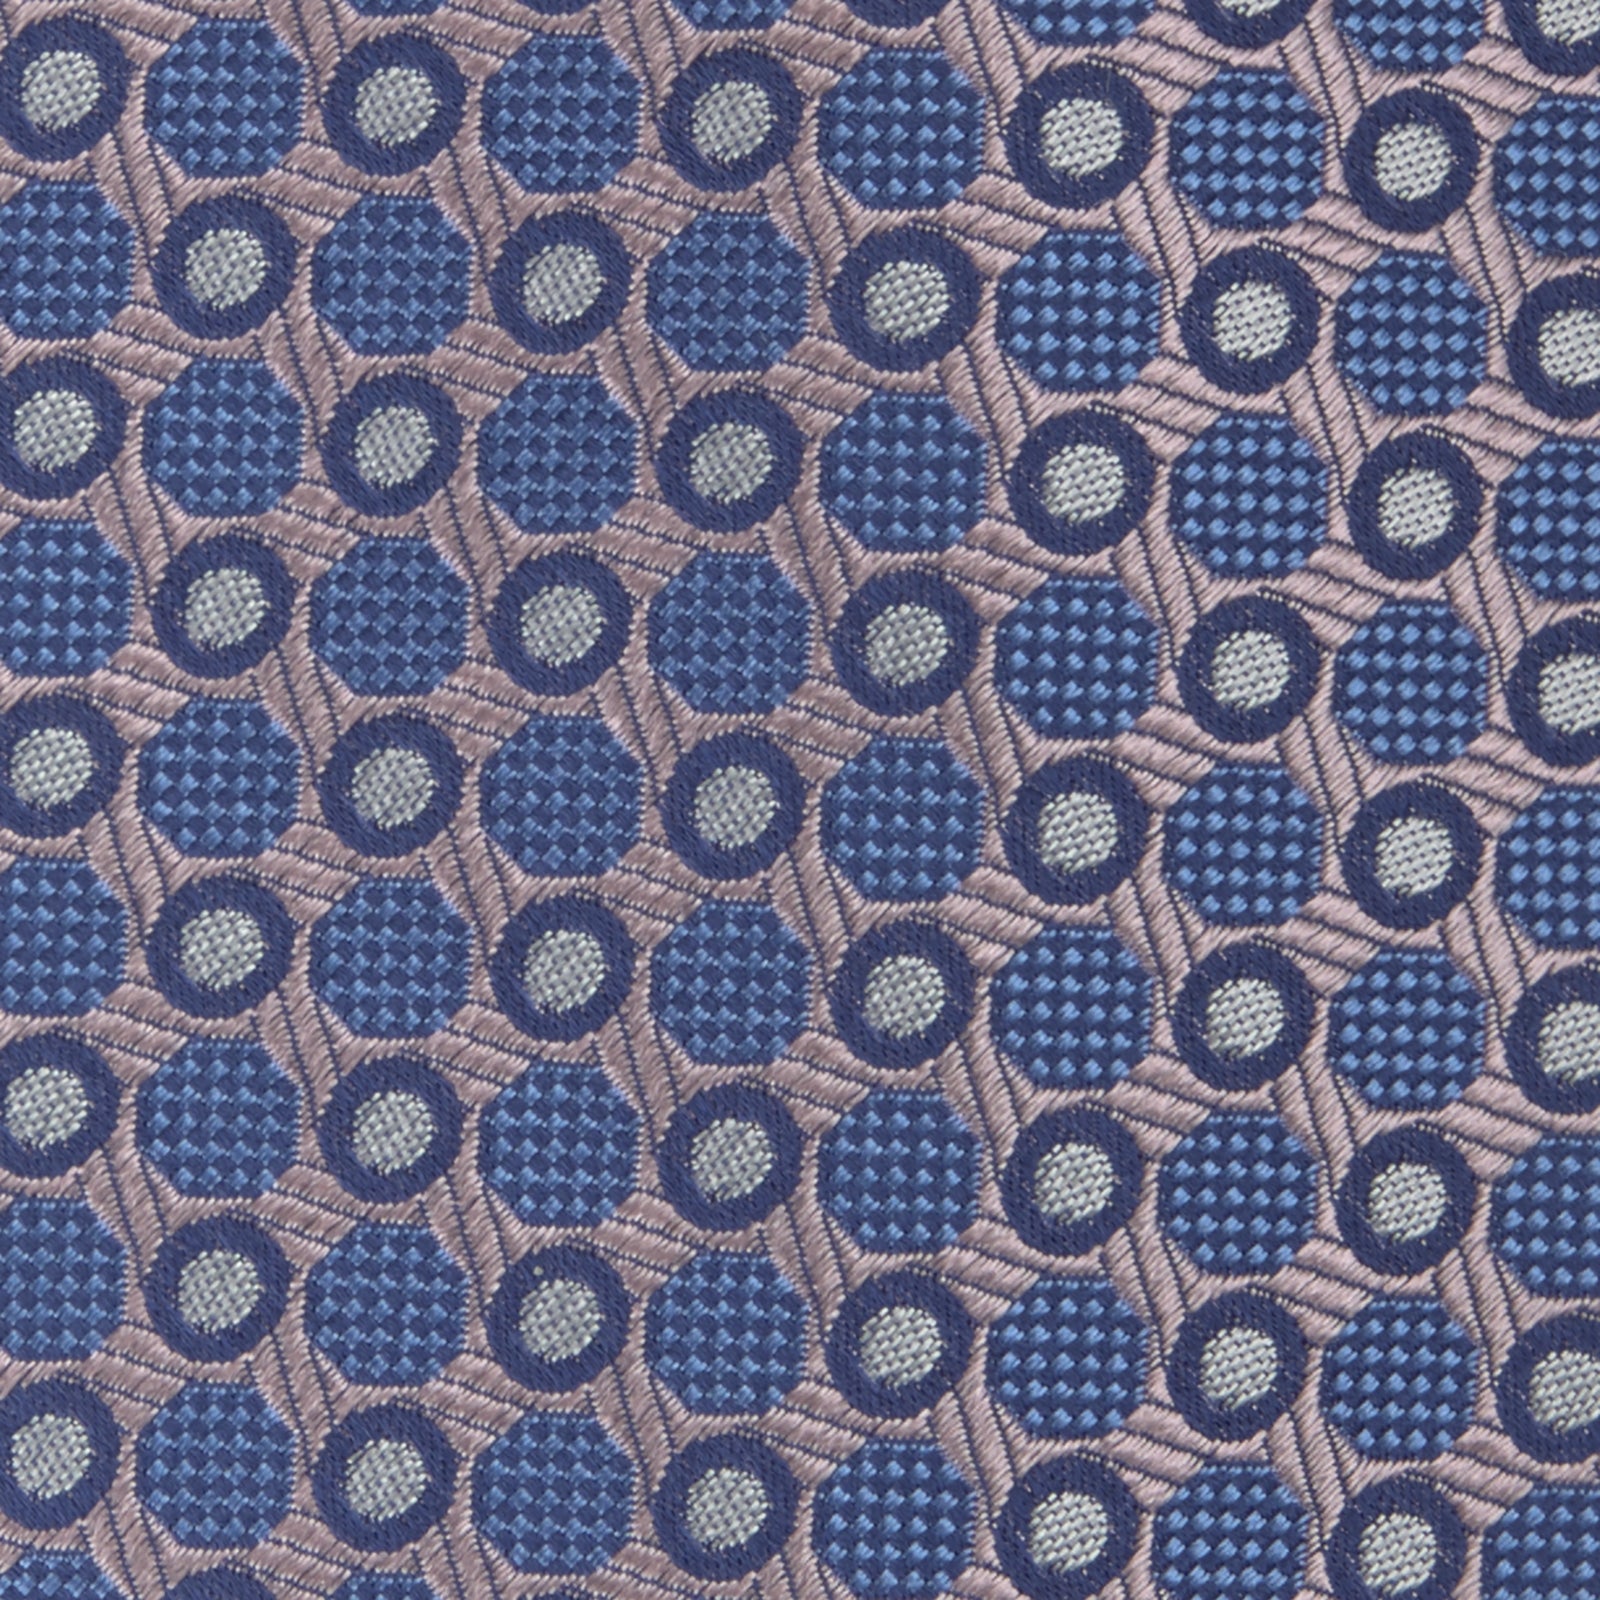 Rose and Blue Circle and Spot Silk Tie